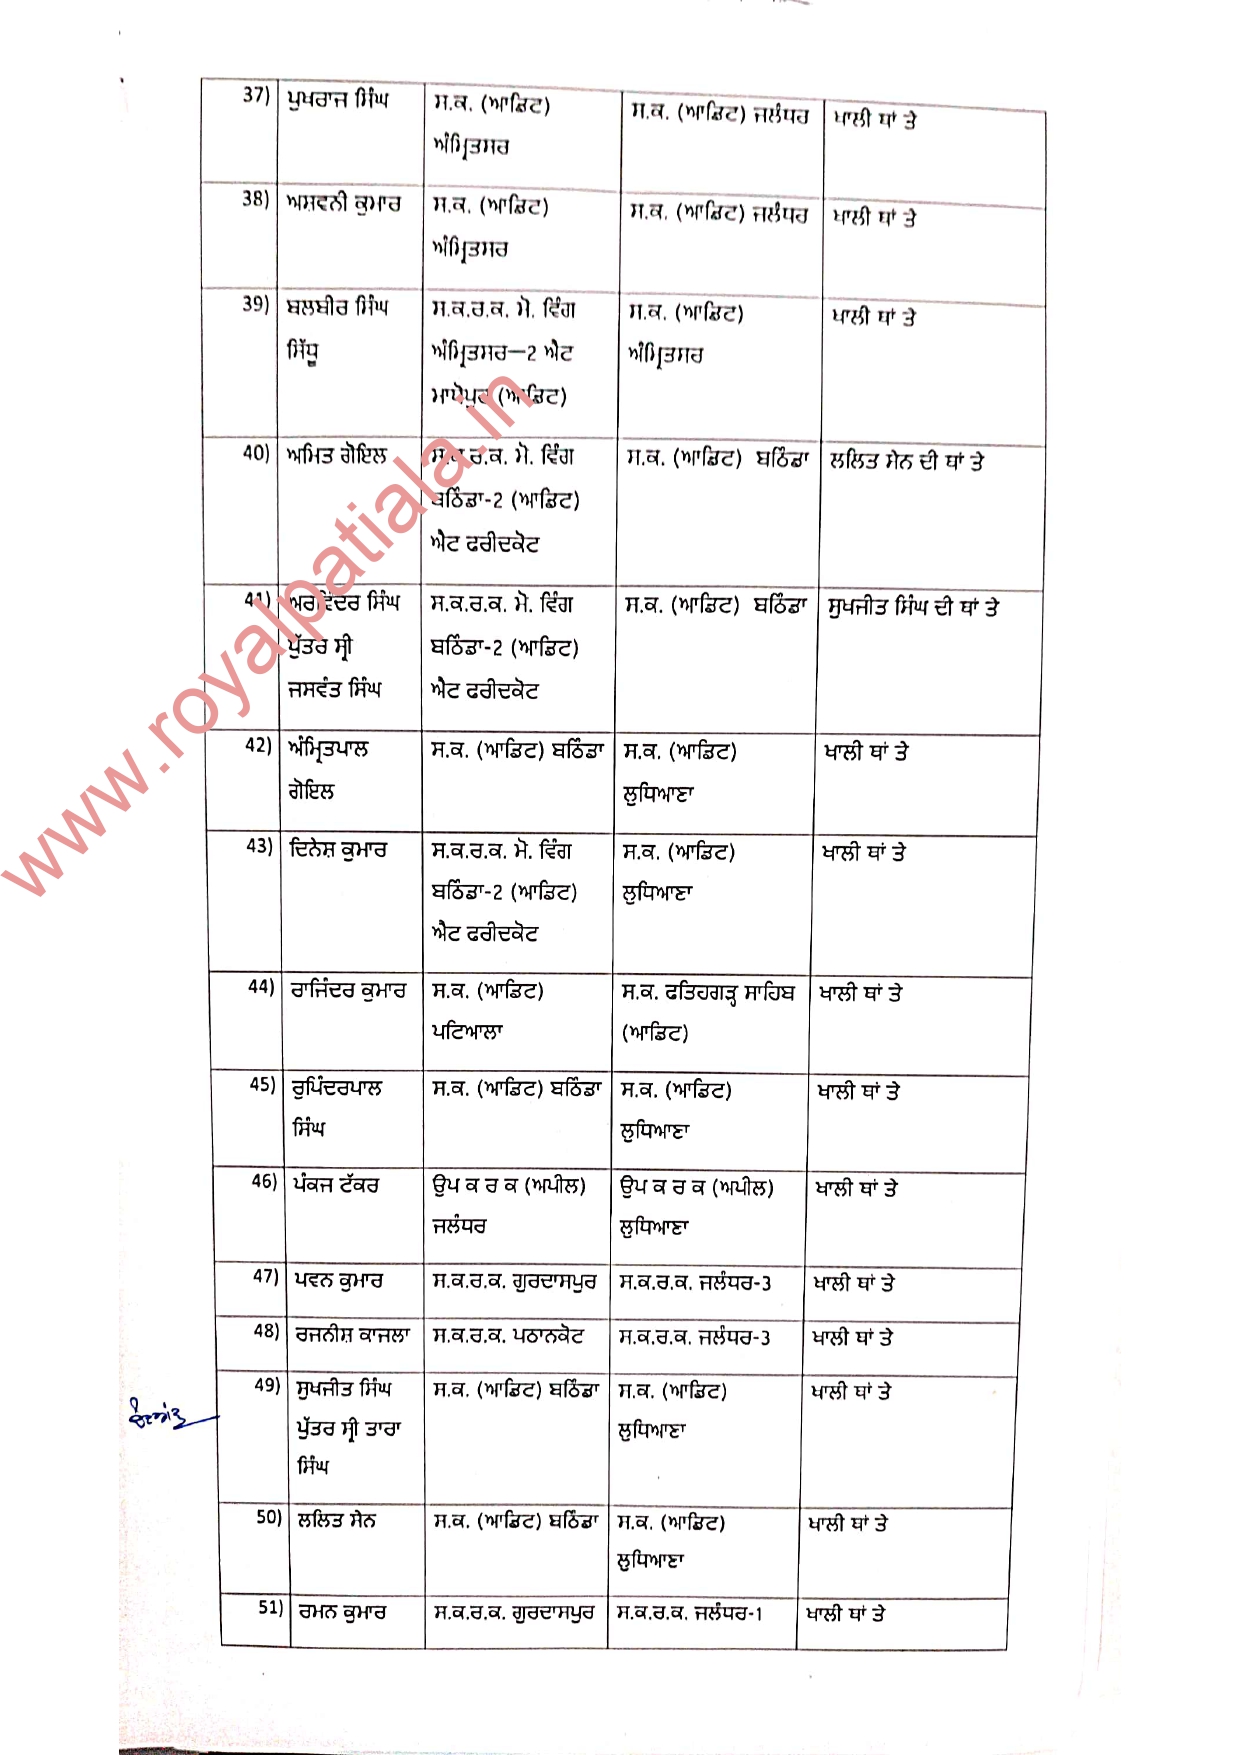 Punjab transfers-73 Excise and Taxation Inspector transferred to GST wing 